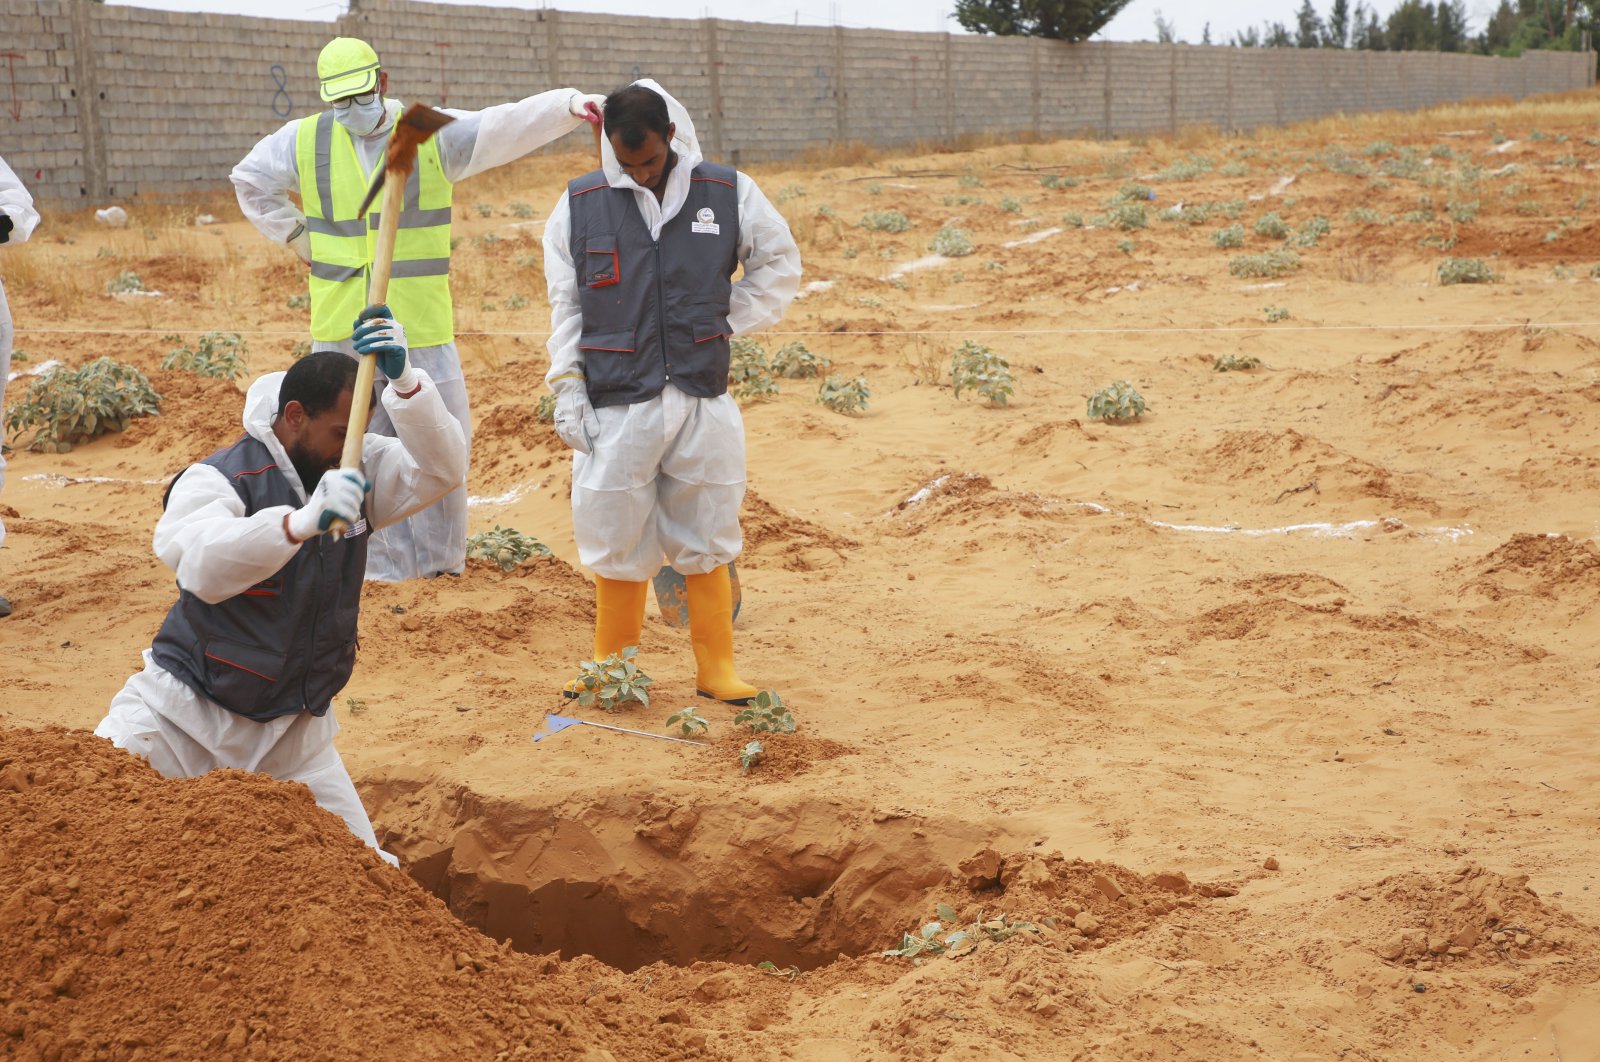 Another 9 bodies were found in a new mass grave in Libya